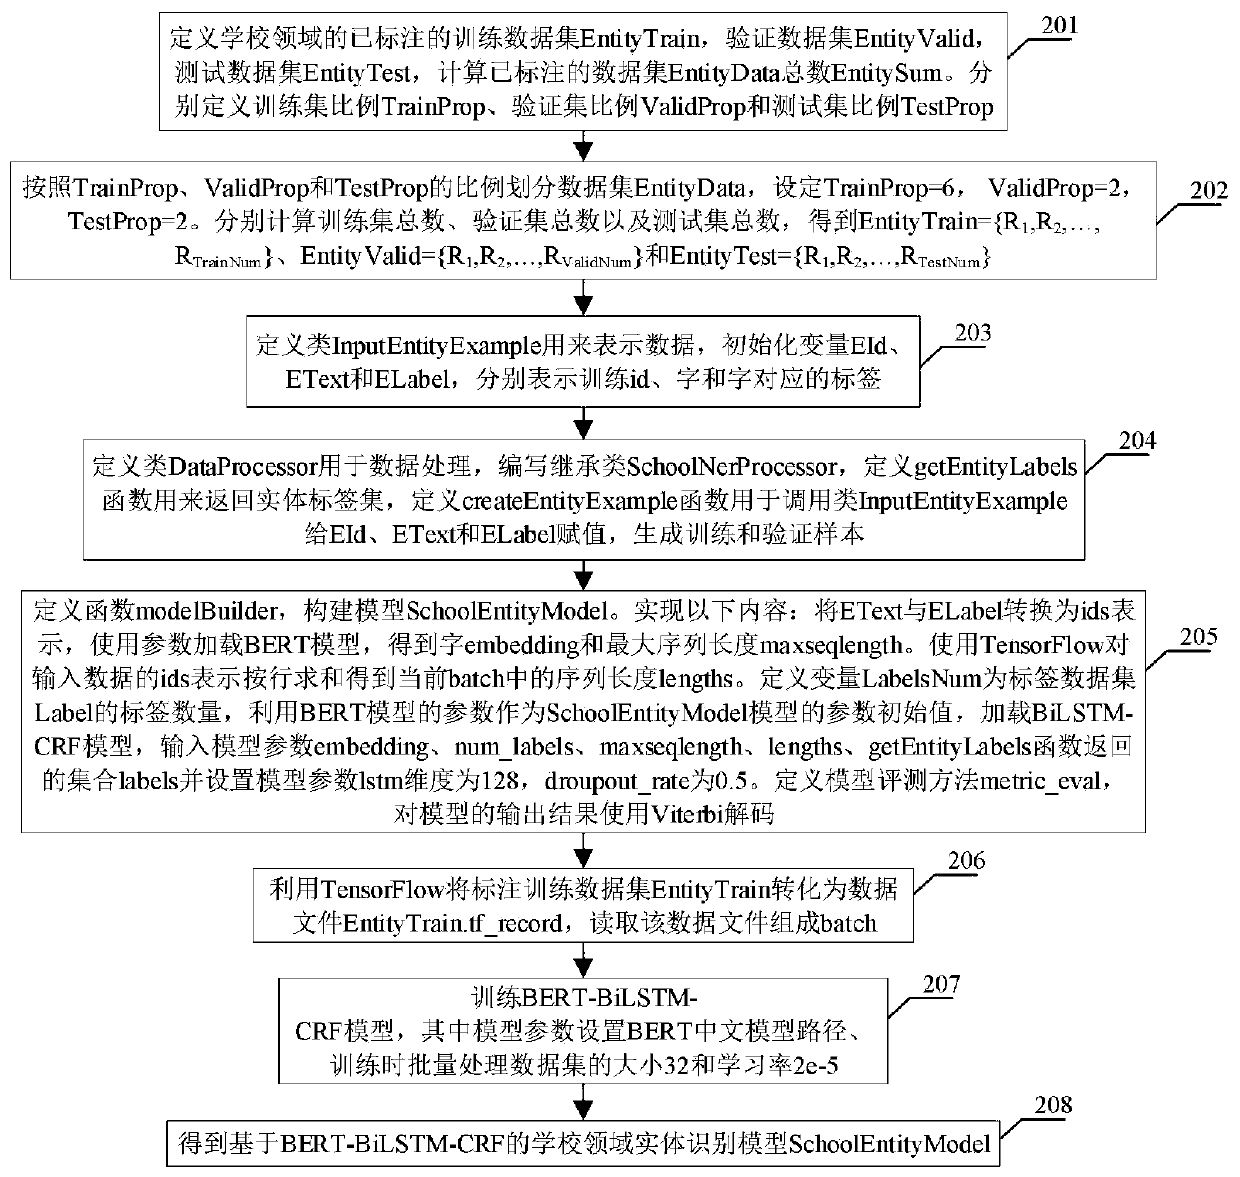 School domain knowledge graph construction method based on entity recognition and attribute extraction model